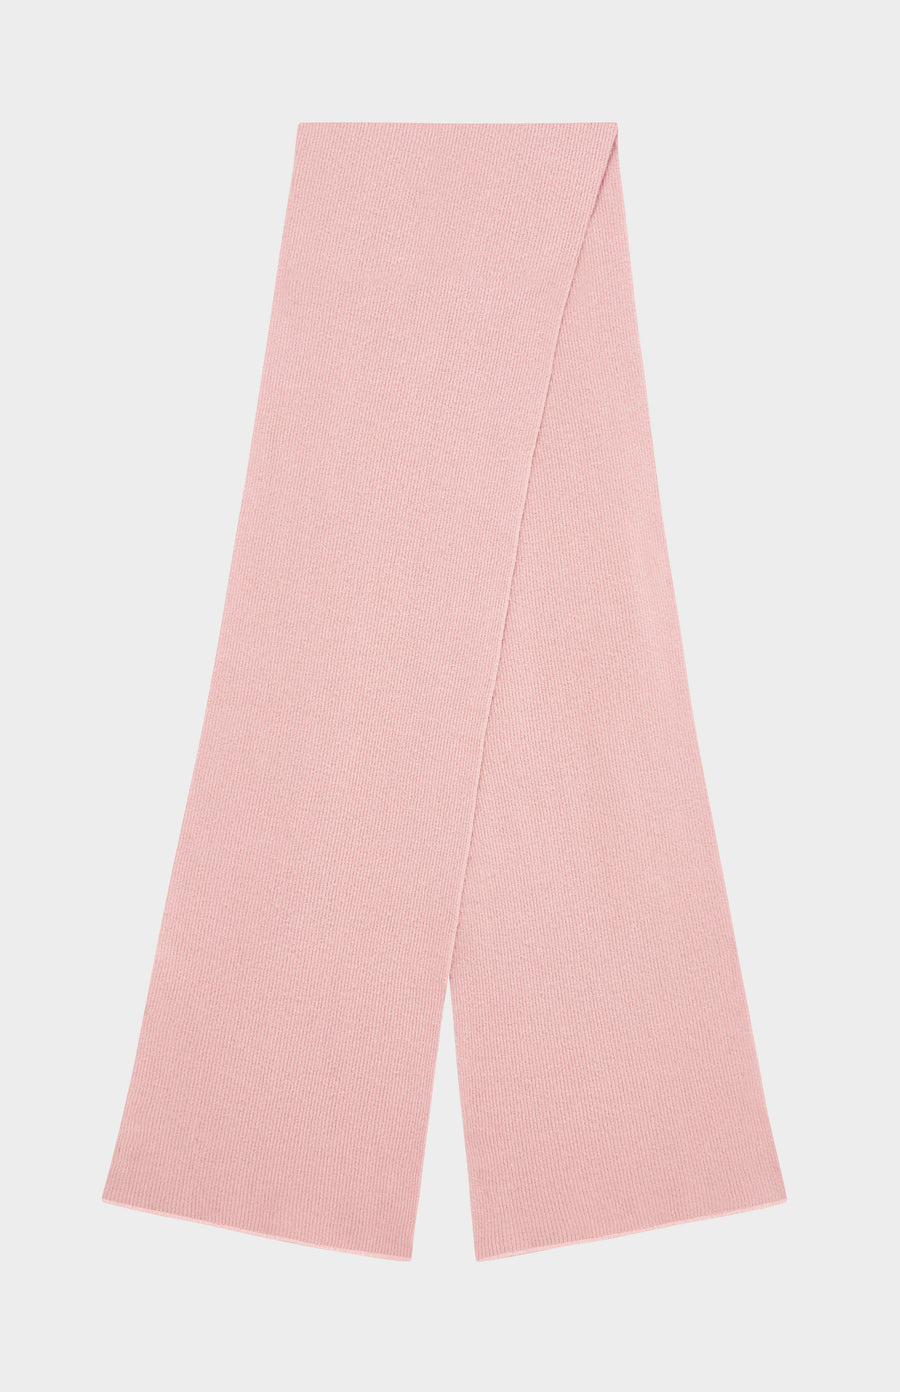 Pringle Cashmere Blend Scarf with Allover Fine Rib in Dusty Pink